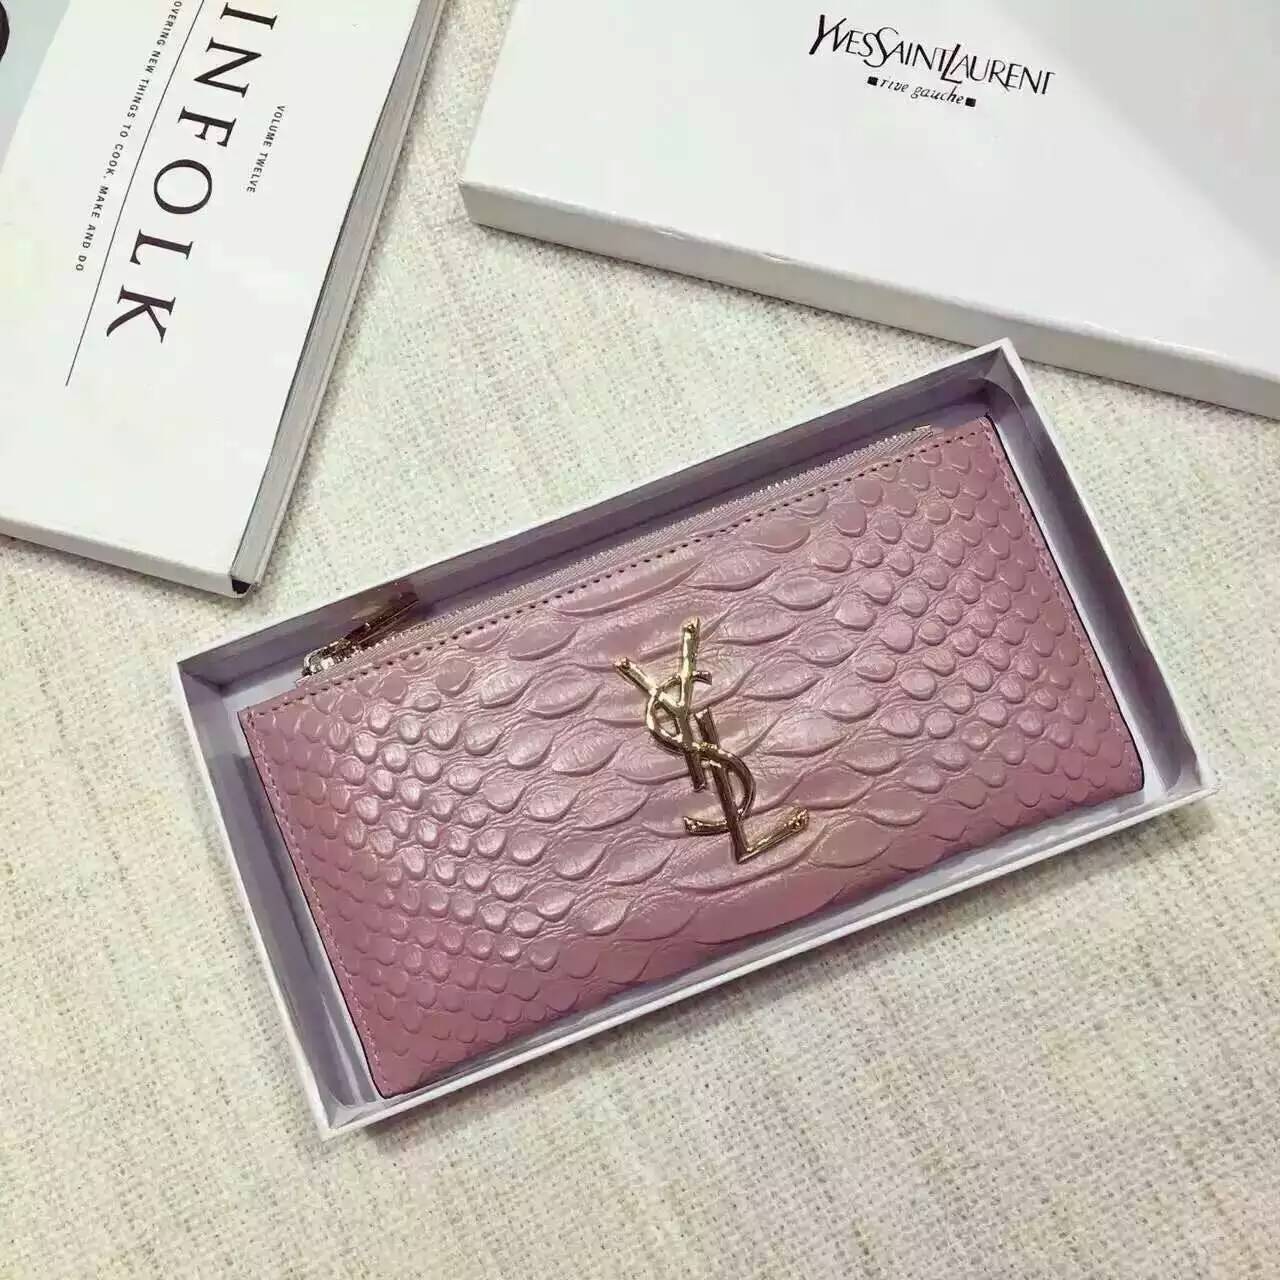 Limited Edition!2016 New Saint Laurent Small Leather Goods Cheap Sale-Saint Laurent Zippy Wallet in Pink Python Embossed Leather